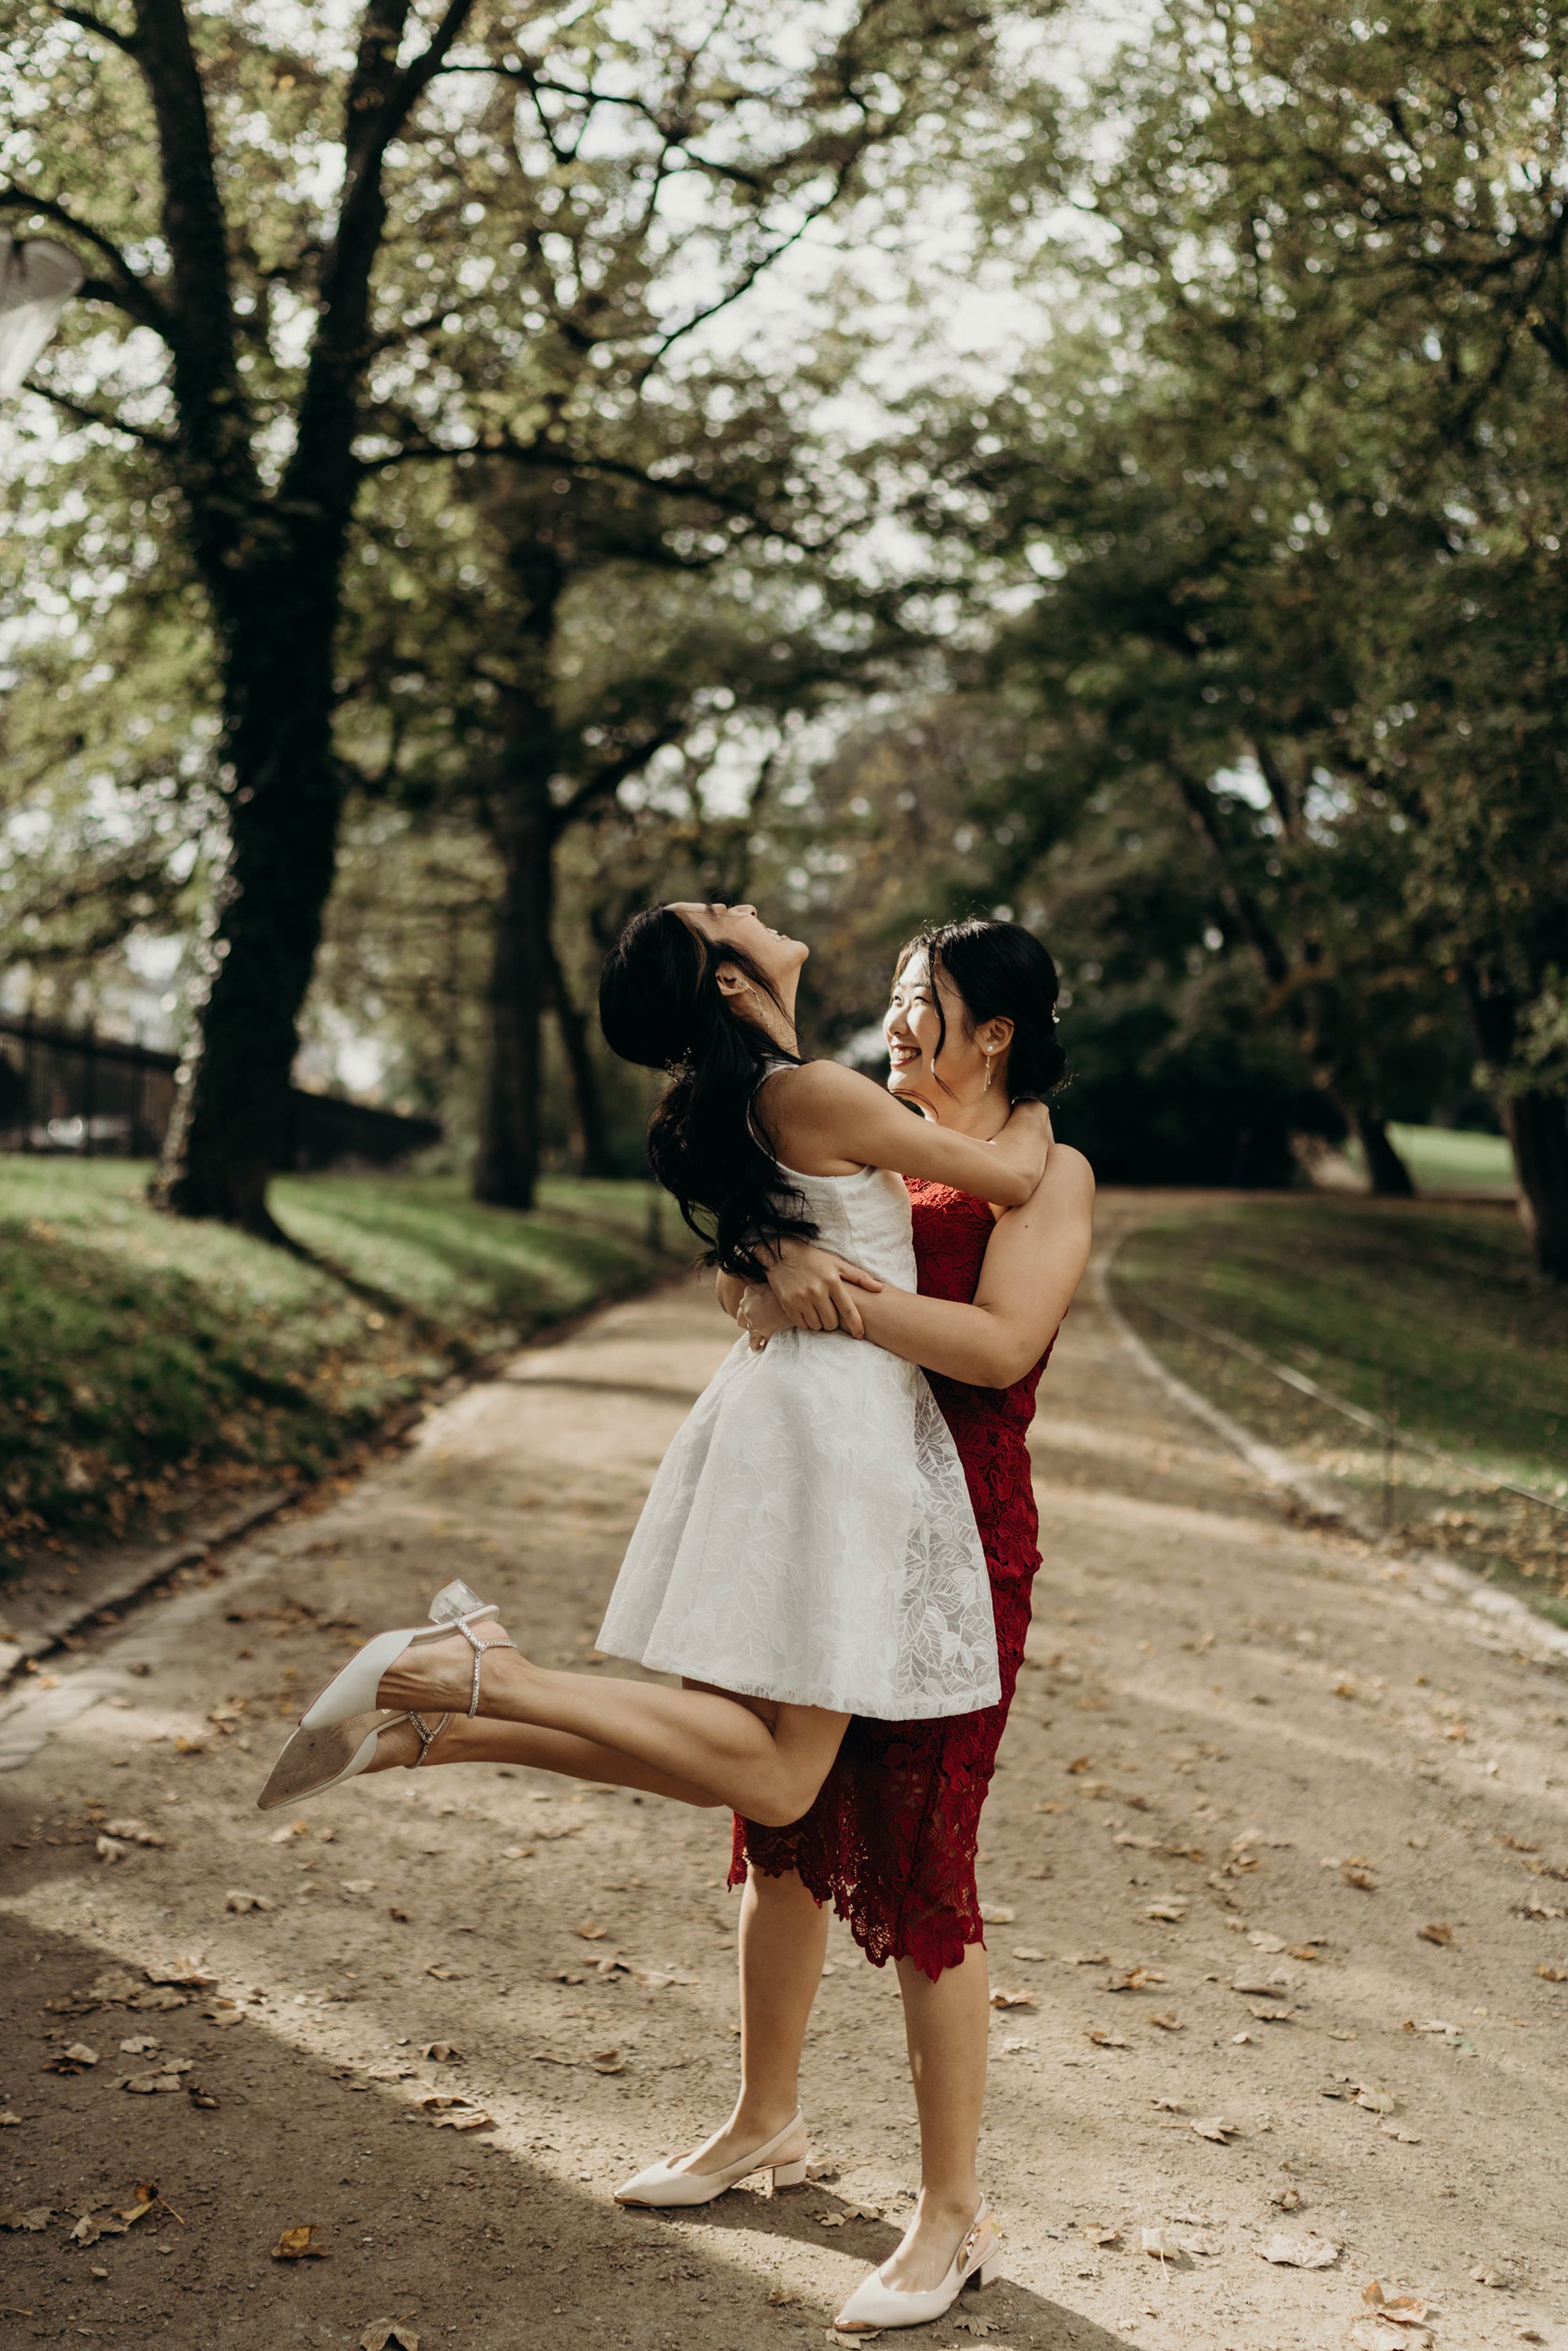 3 Couple's Poses That Result in Magical Wedding Photos - TLIC Wedding  Photography & Wedding Videography